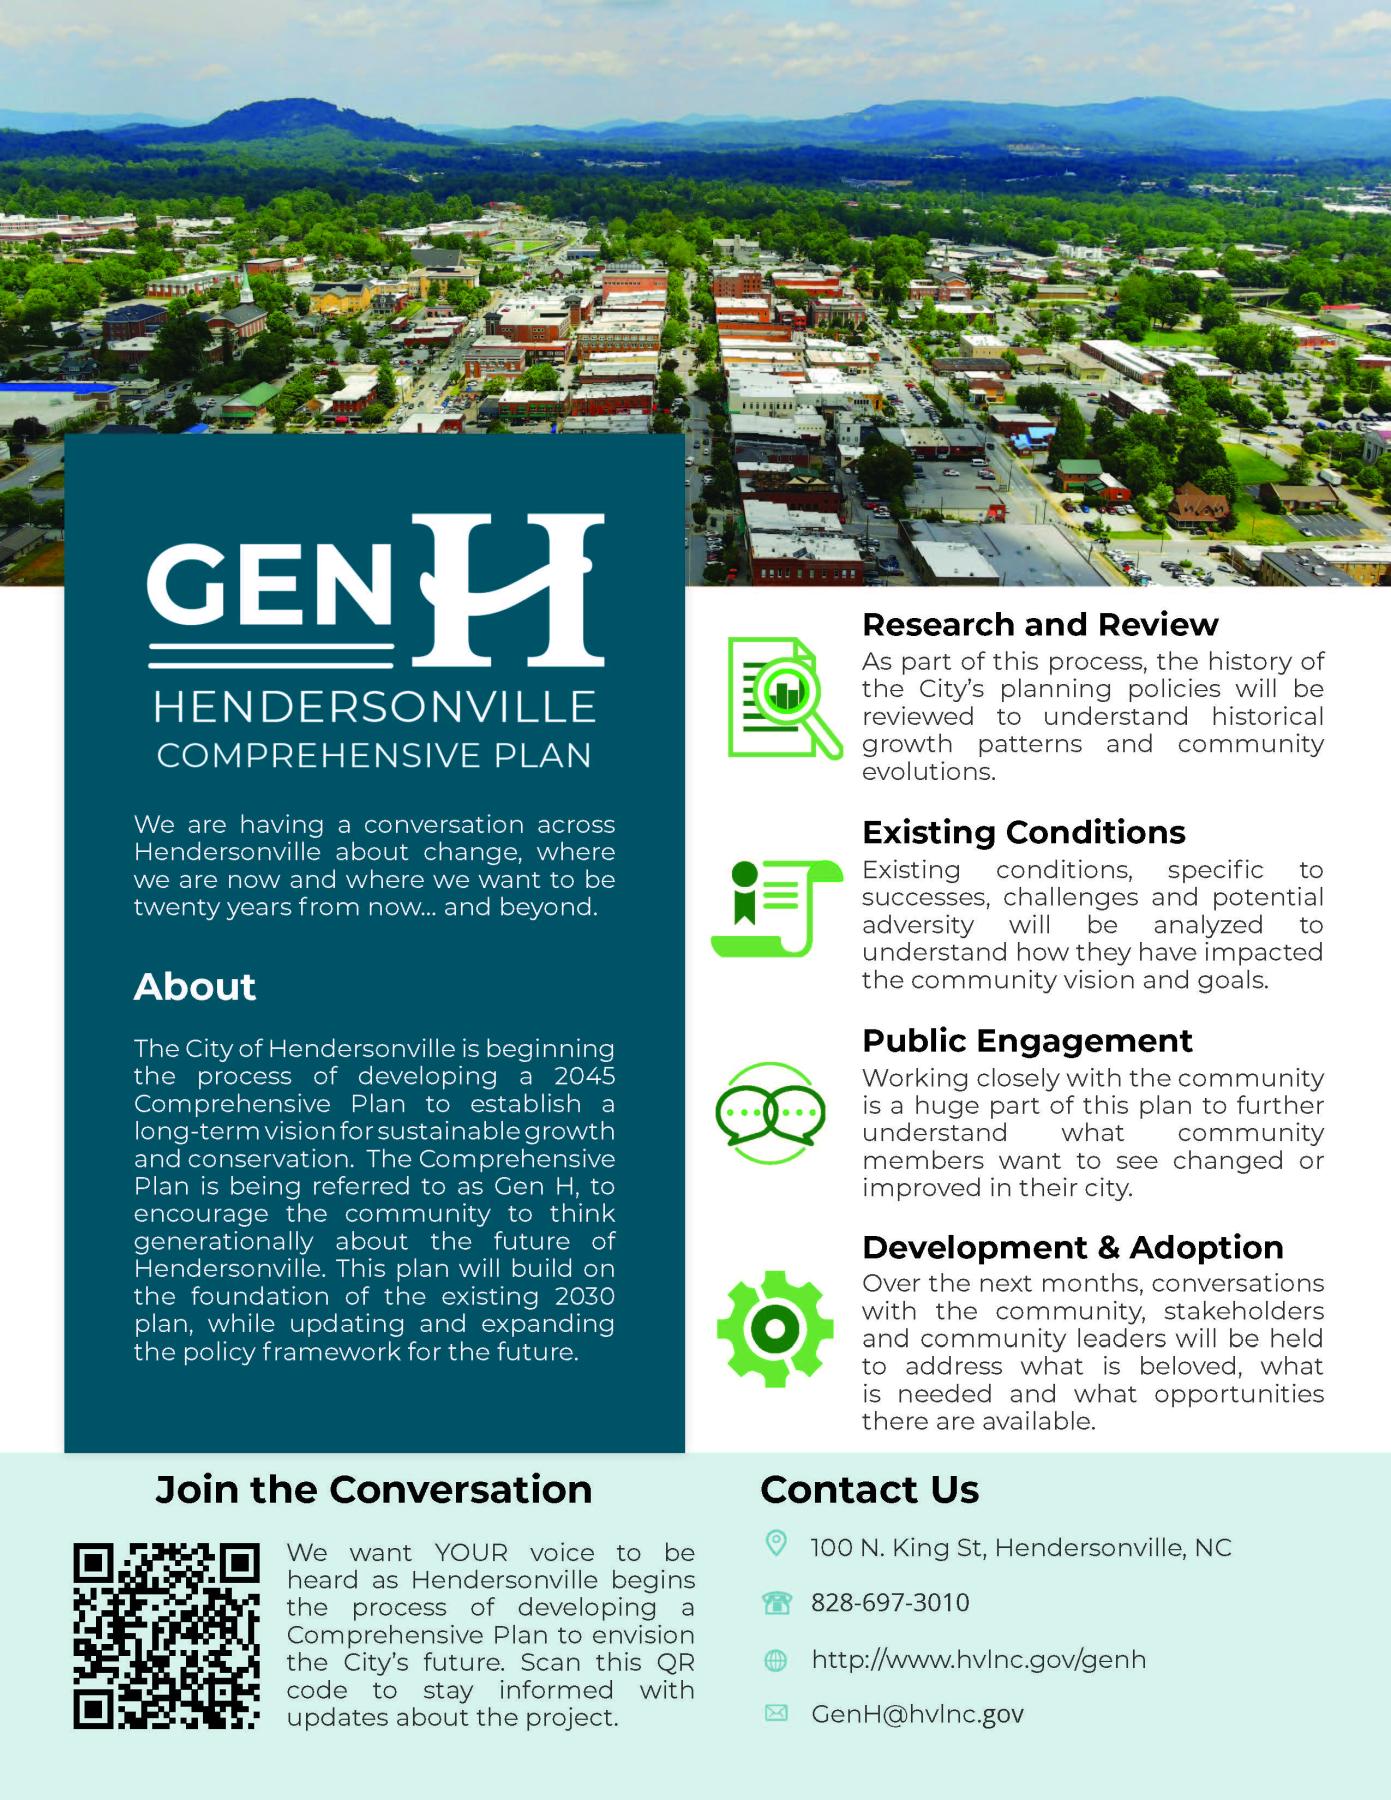 Skyline of Hendersonville with information on the comp plan